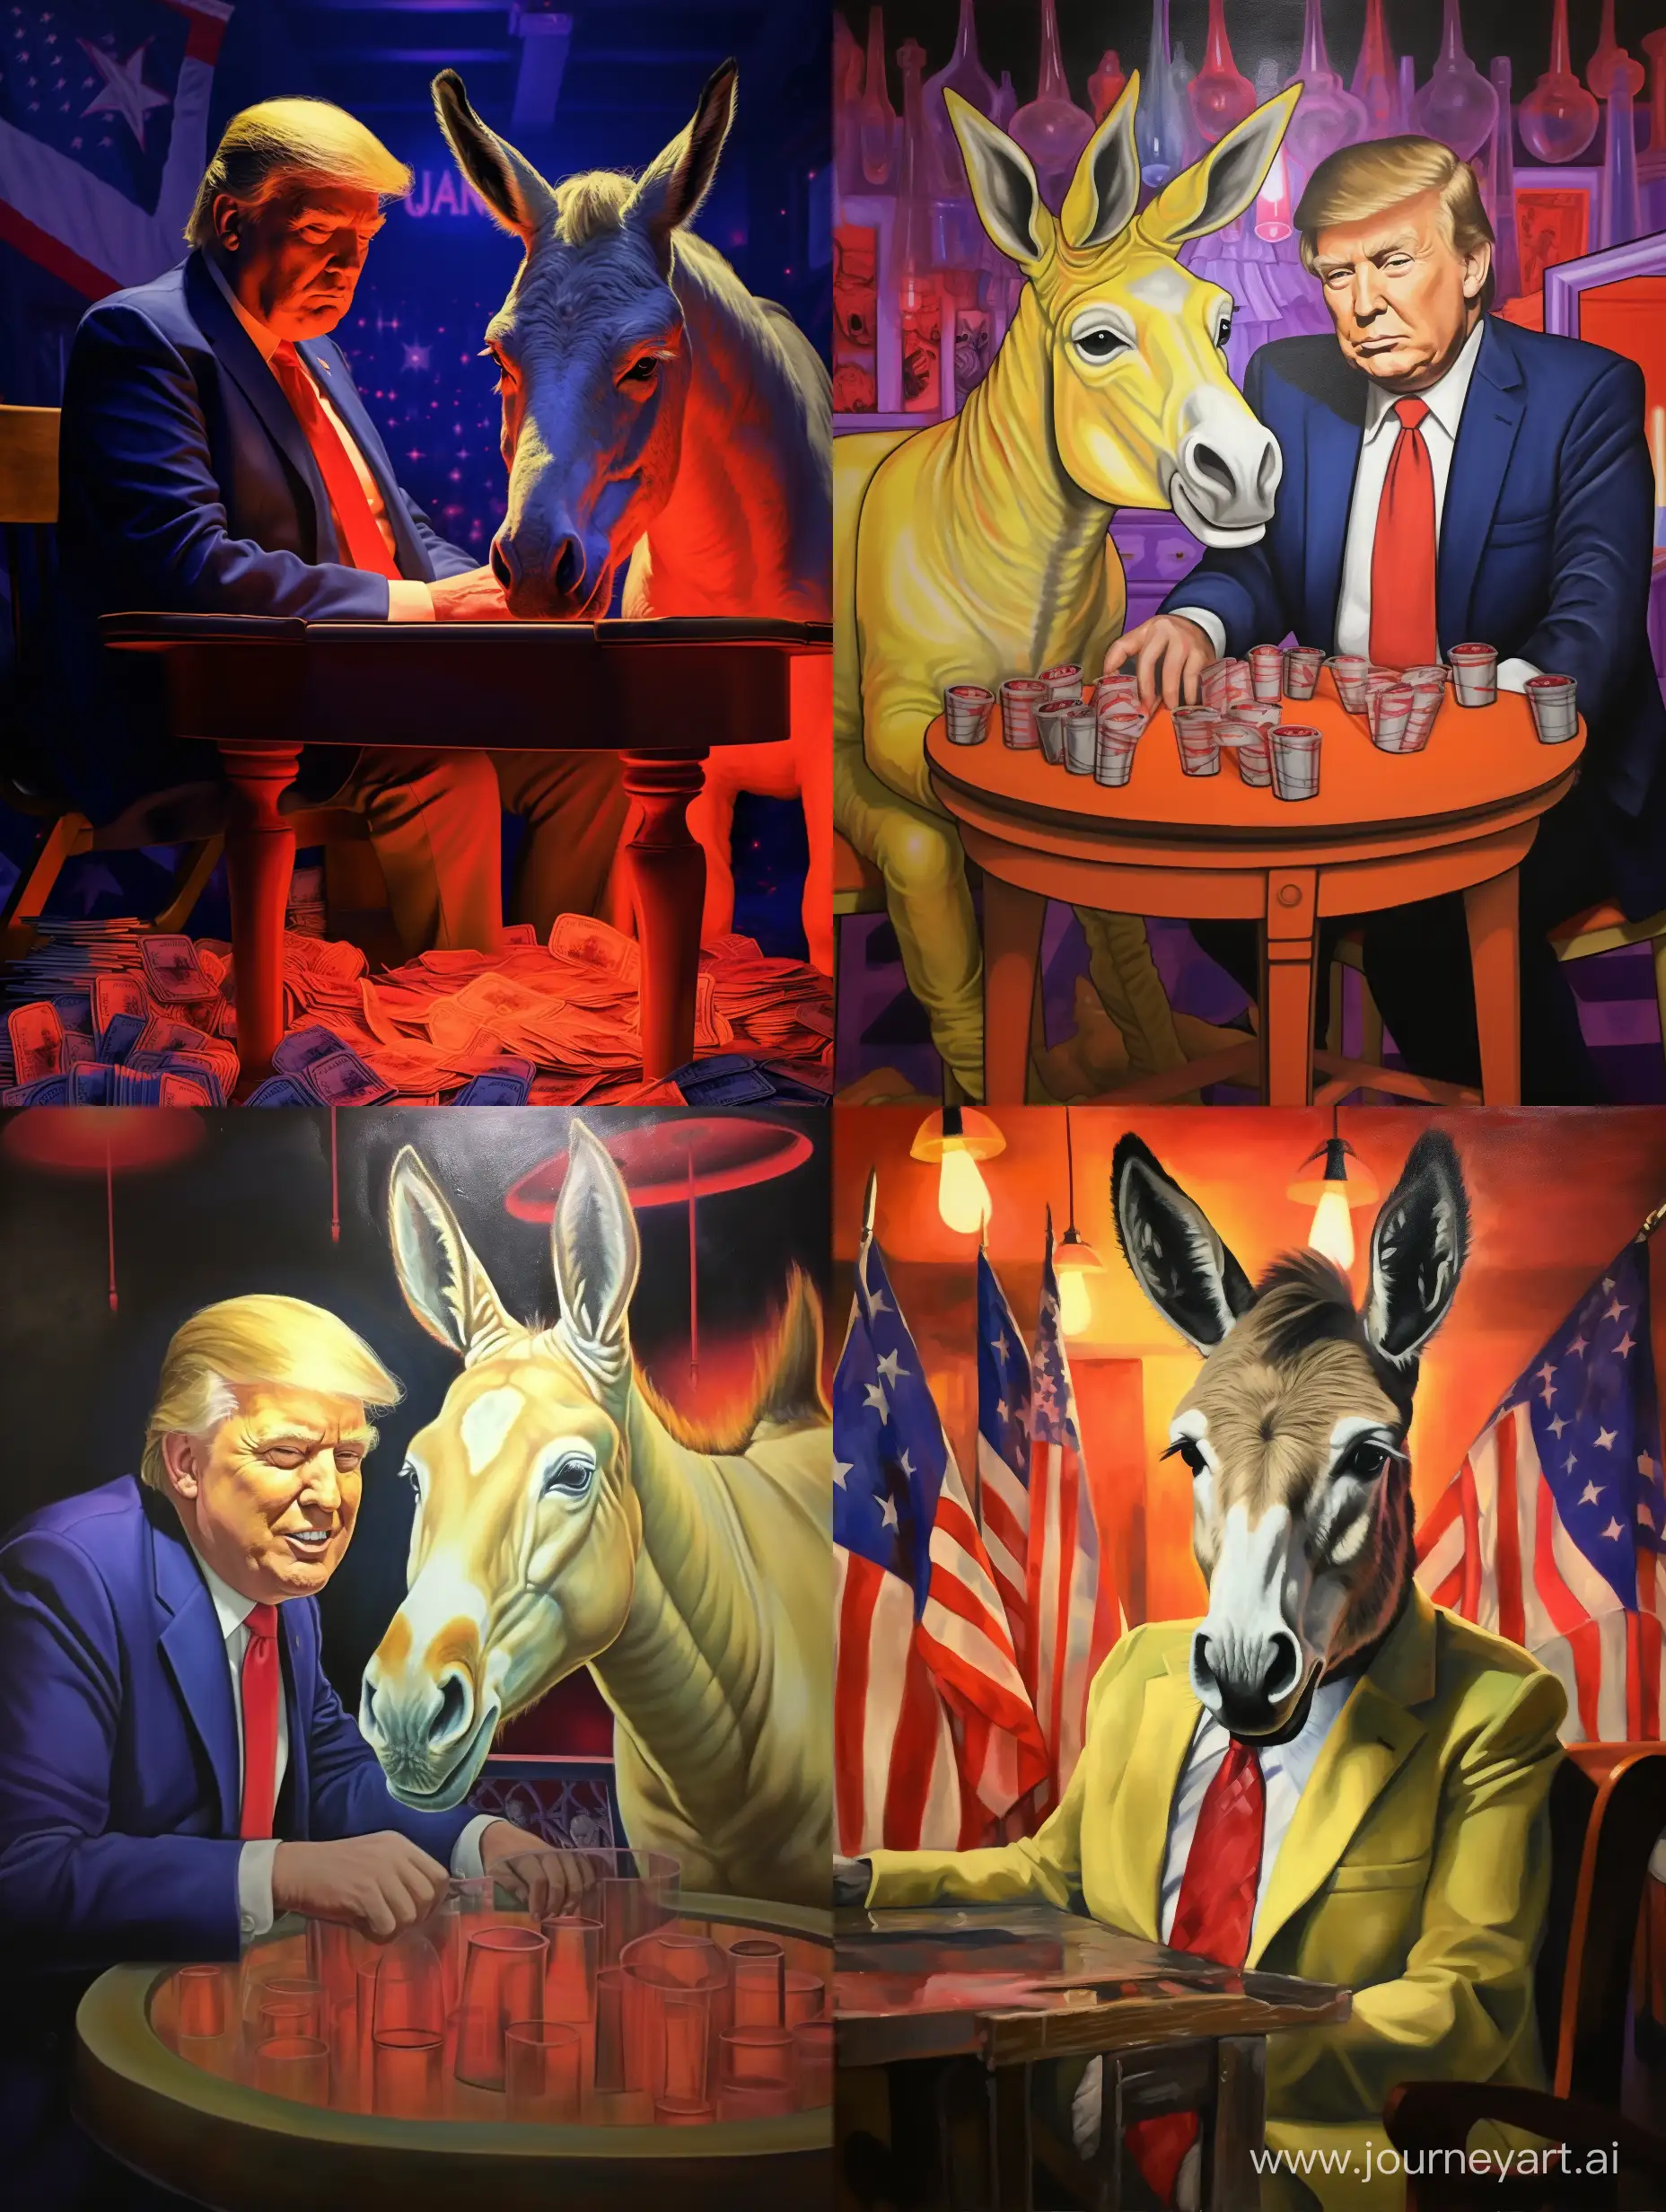 Vibrant-Glowing-Casino-American-Flag-Donkey-Poker-Table-with-Donald-Trump